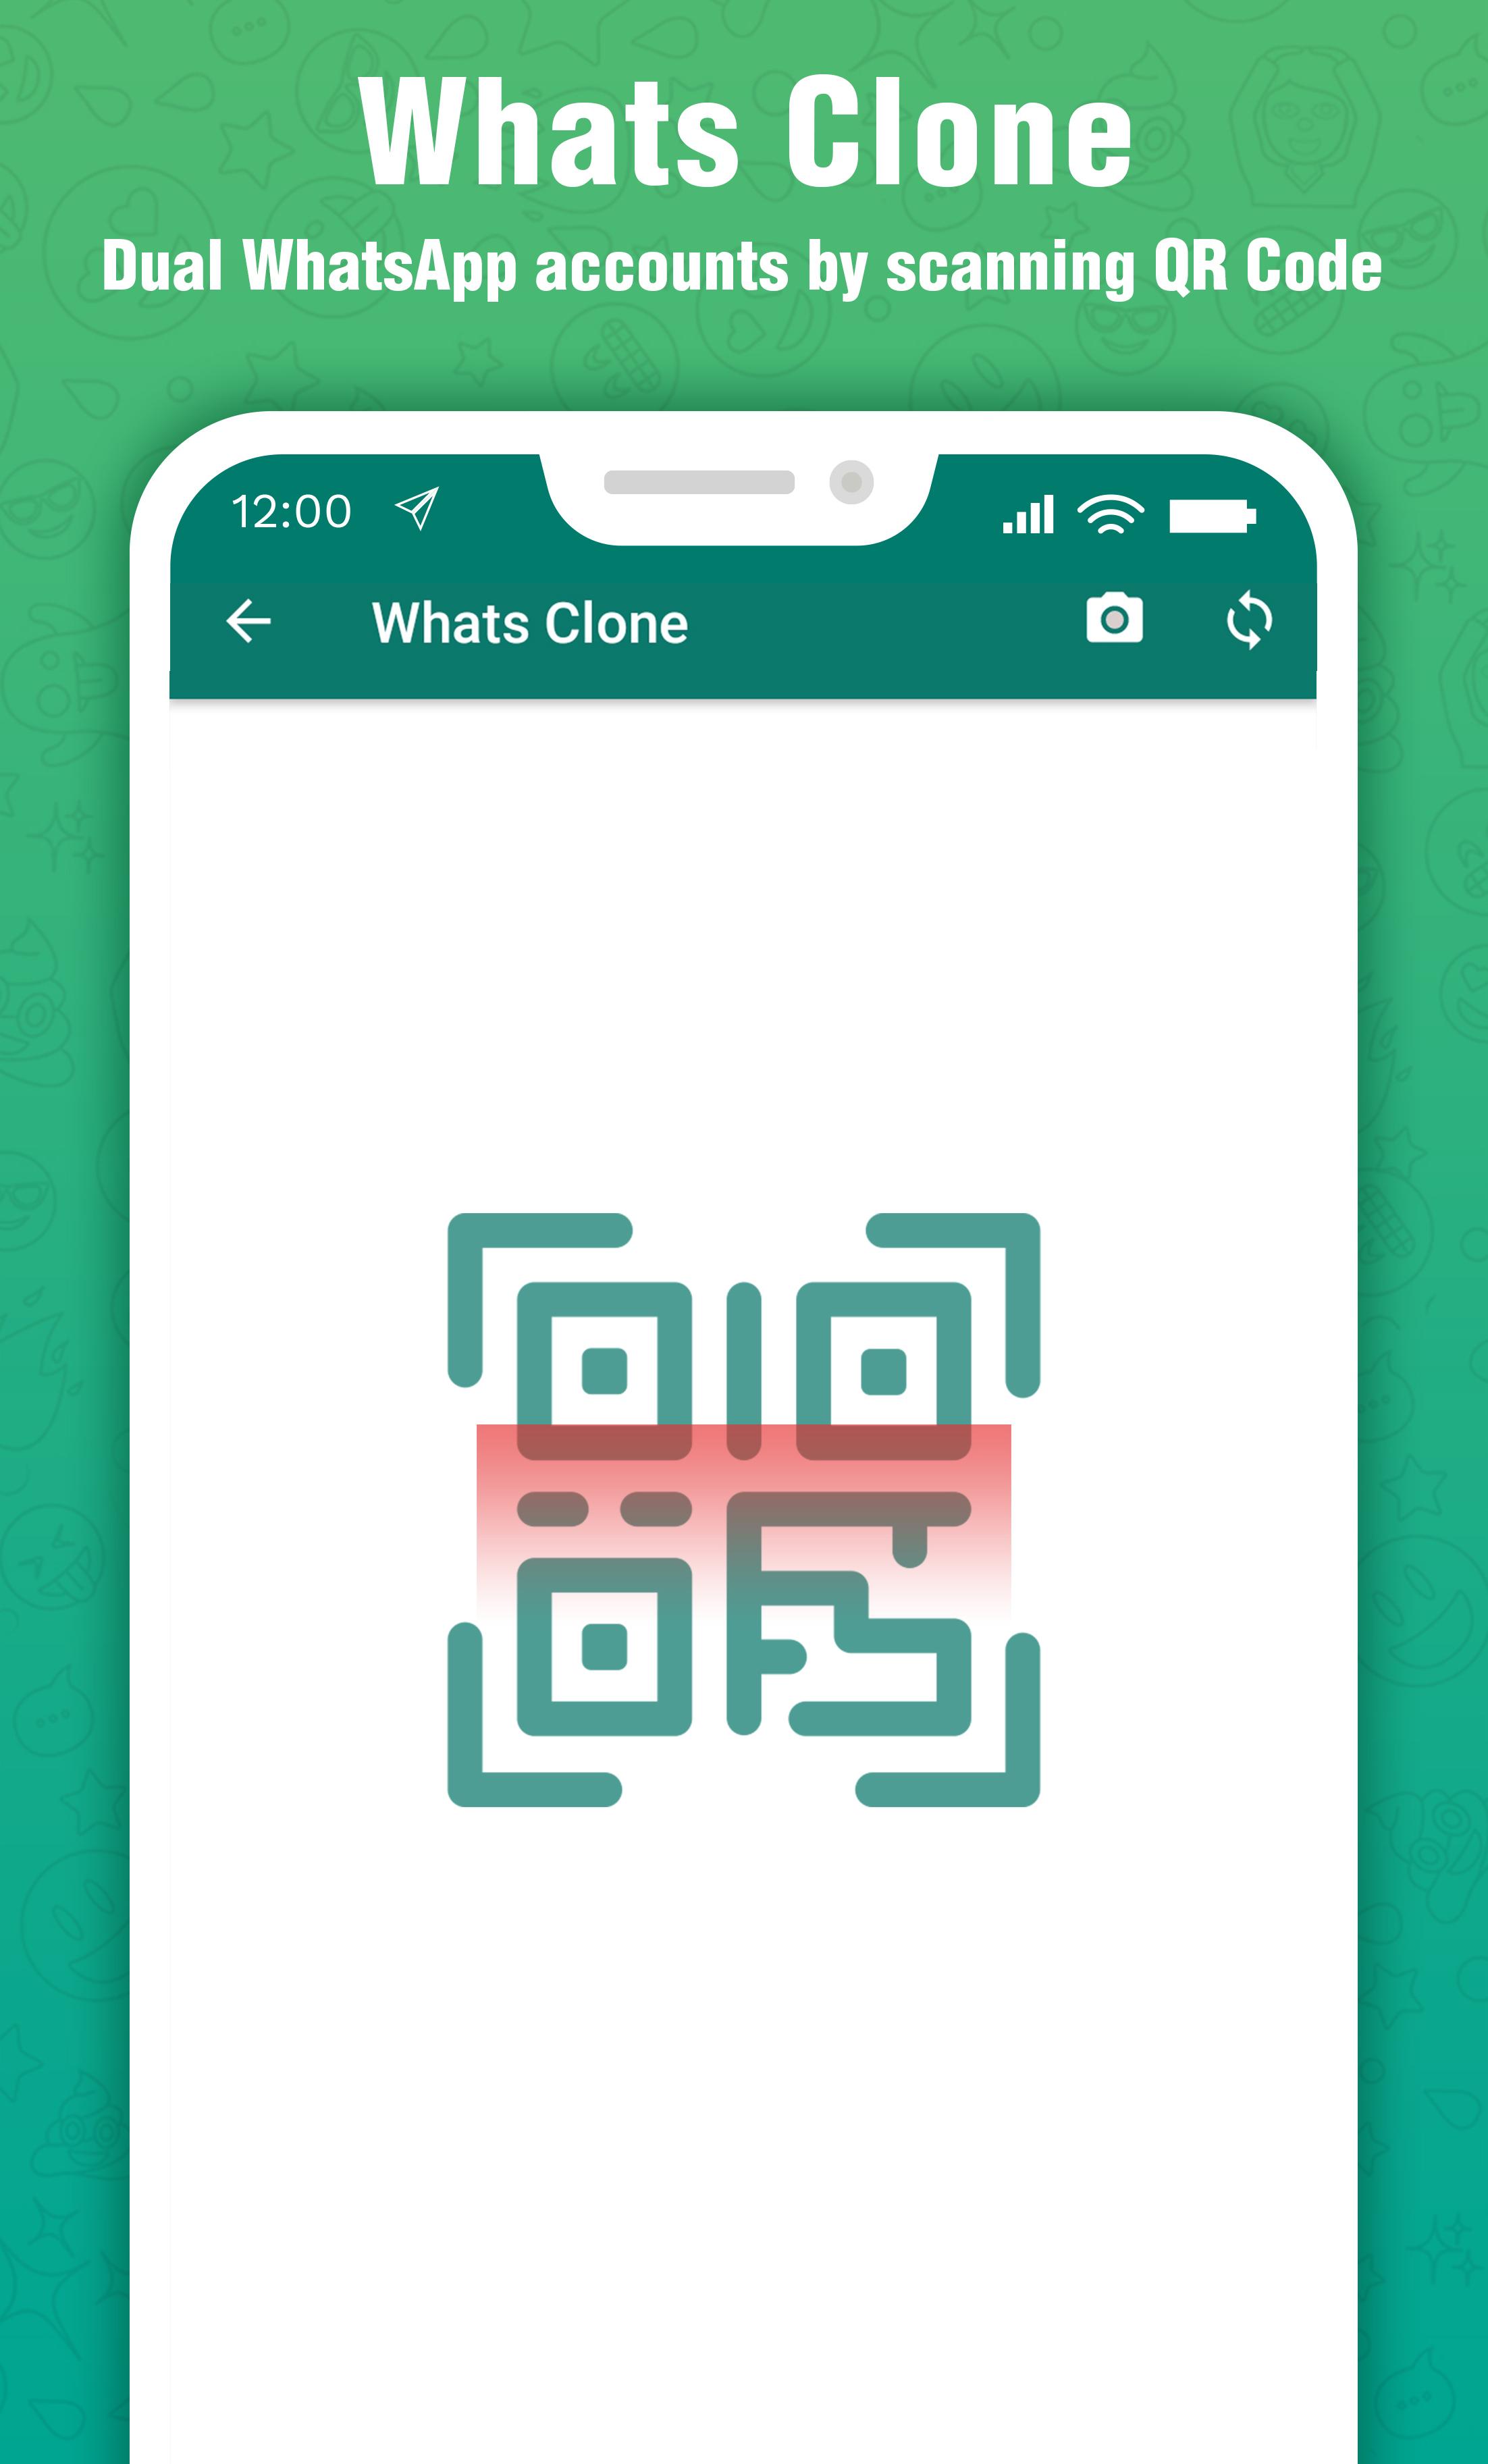 Clone App for Whatsapp - Status Saver for Android - APK ...